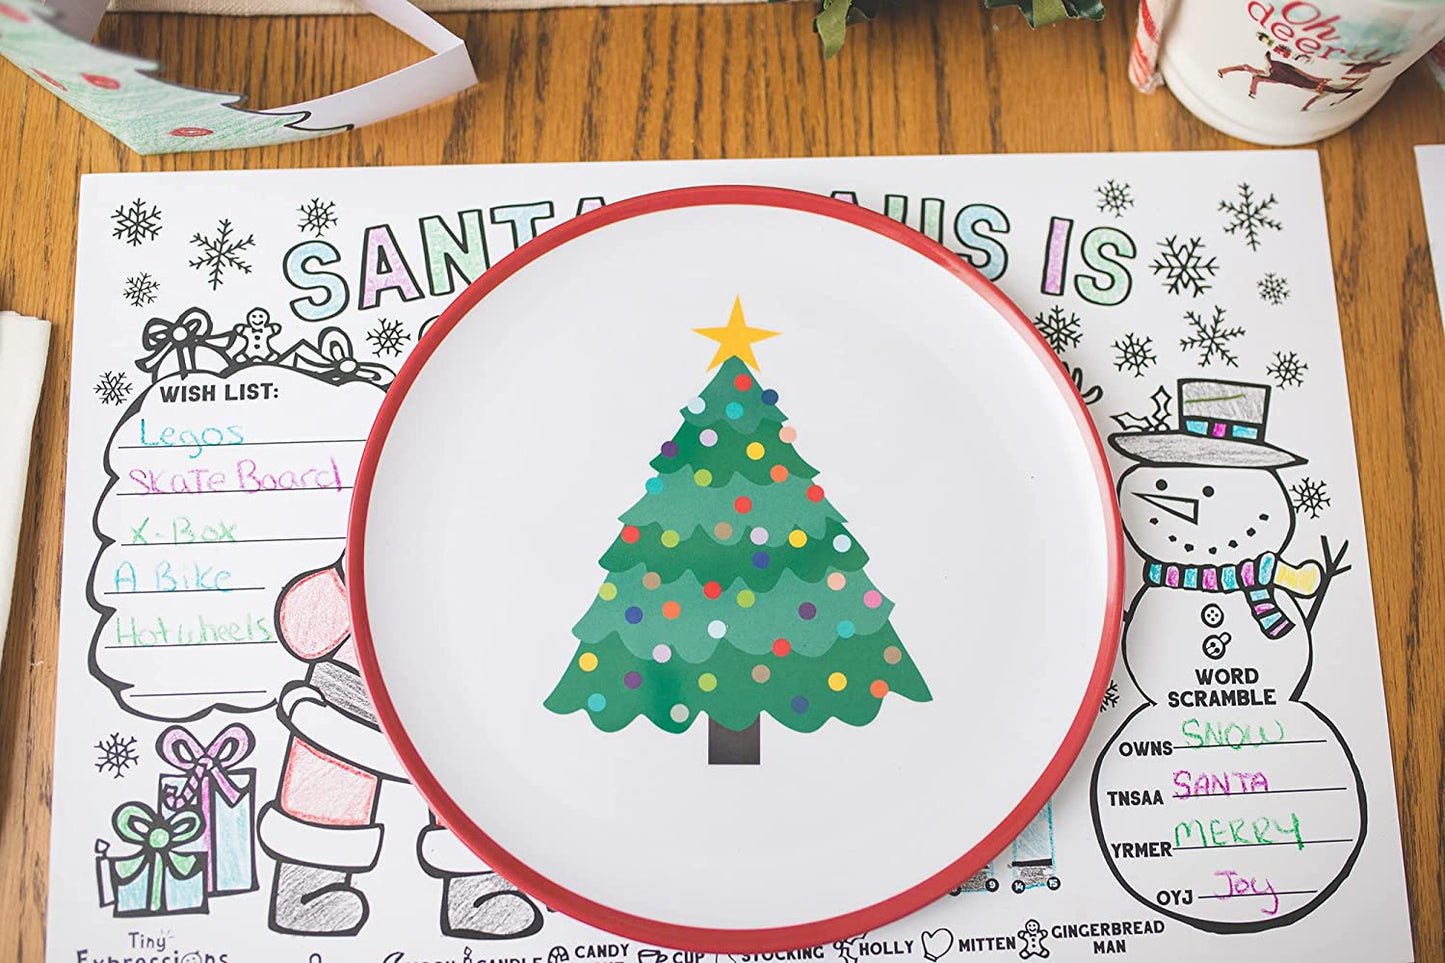 Holiday Plates for Kids with Colorful Christmas Tree (Set of 4)